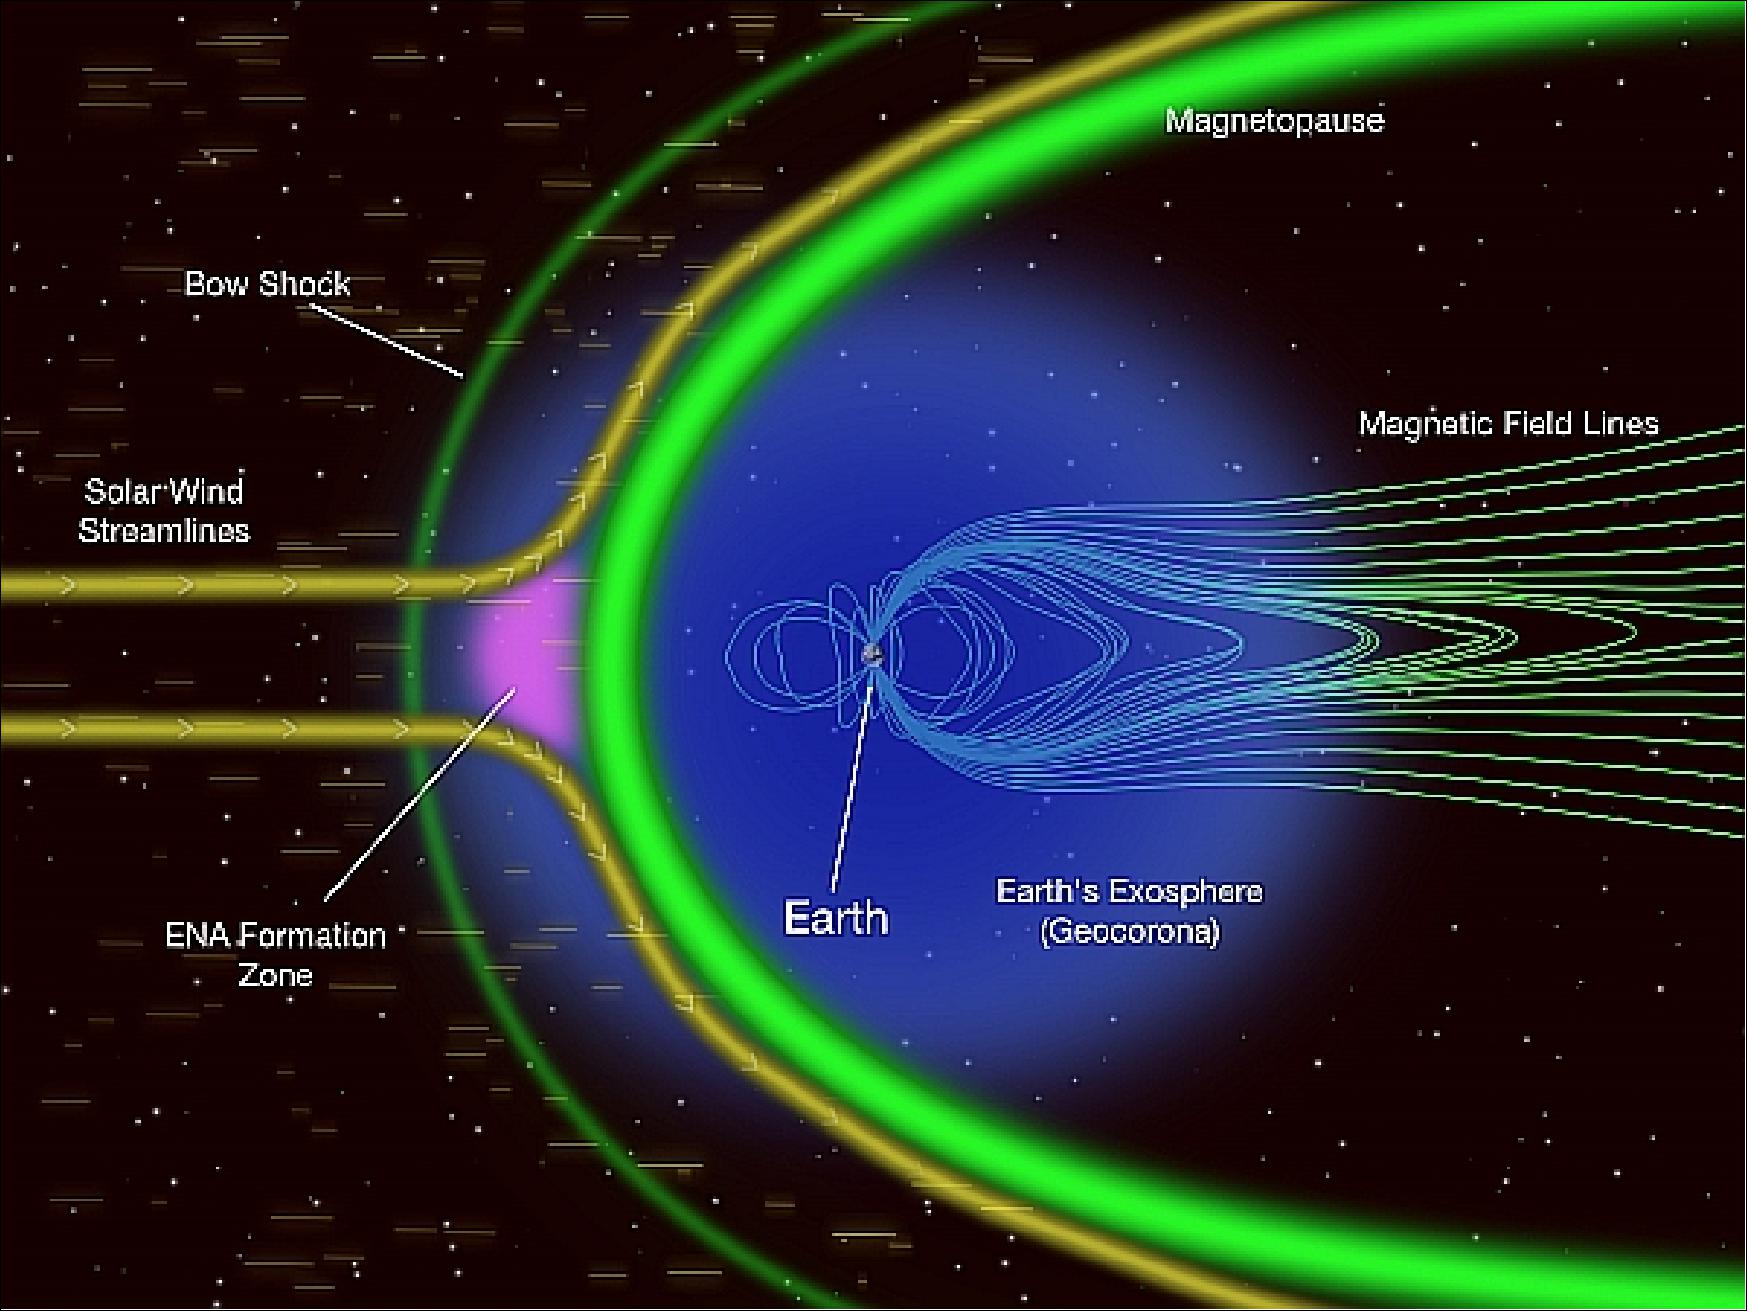 Figure 32: Model of the solar wind crashing into the magnetopause of Earth (image credit: SwRI)